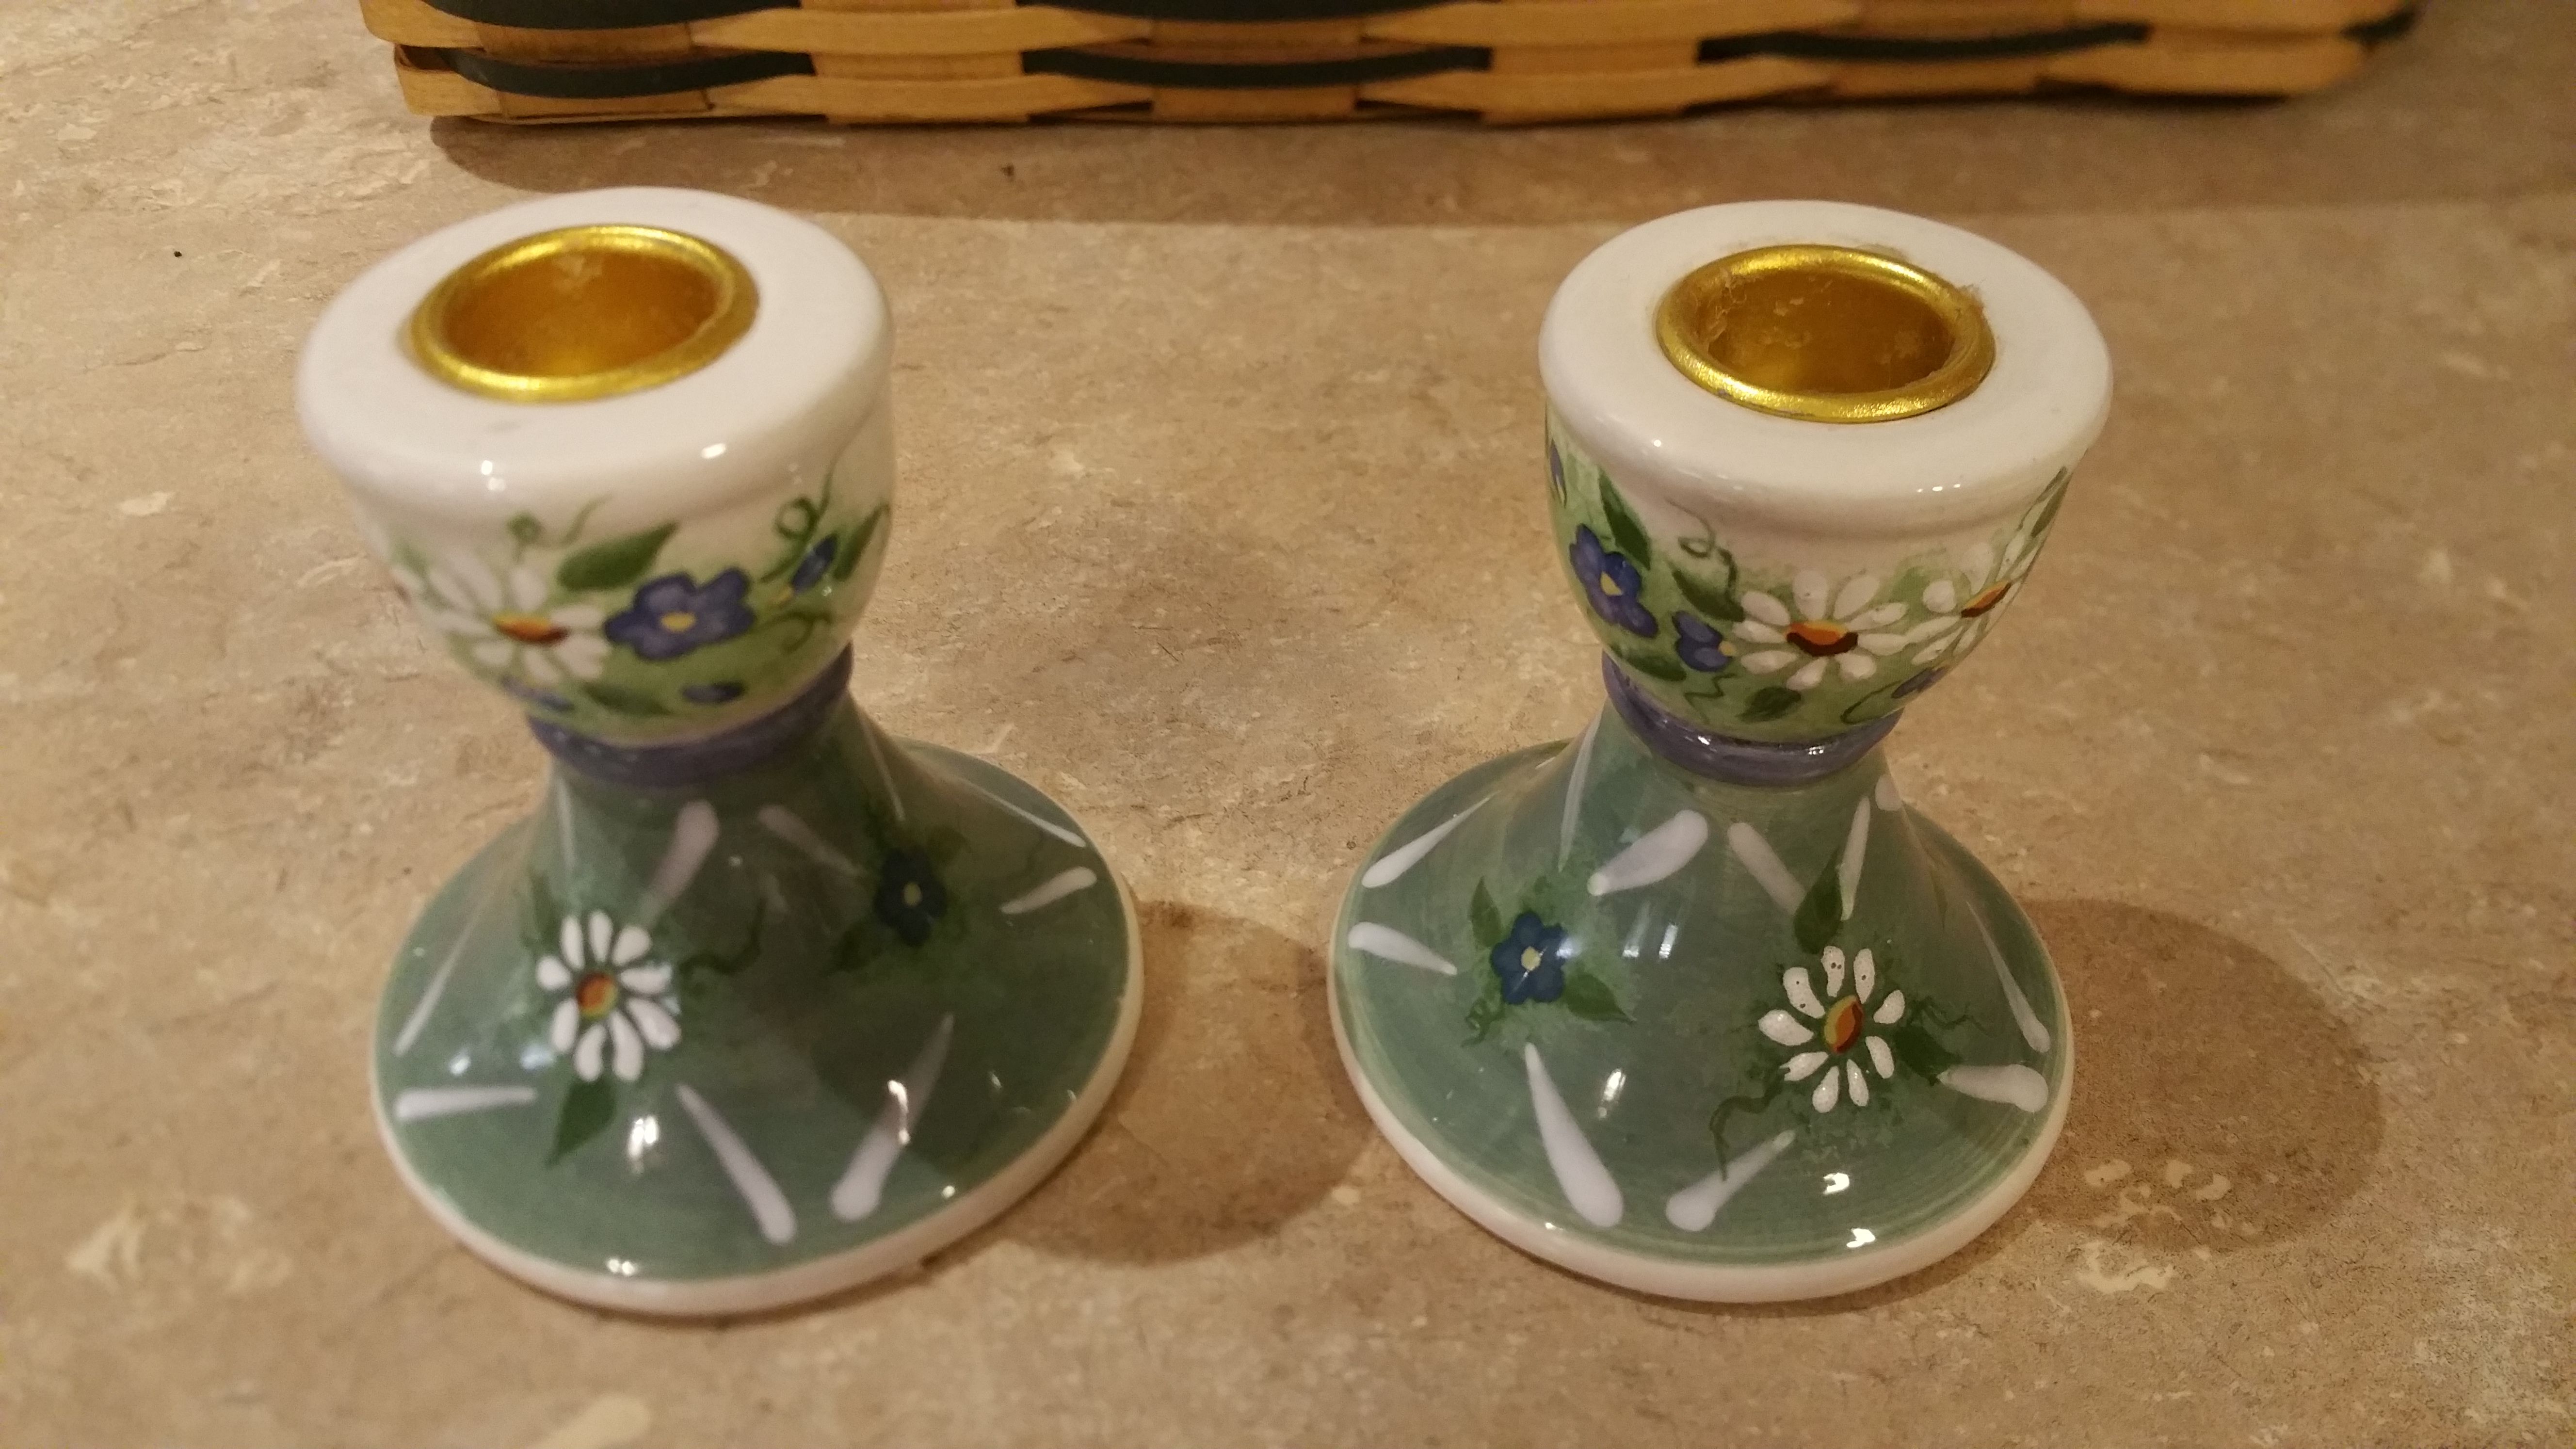 Hand-painted candle holders by Kathy hatch